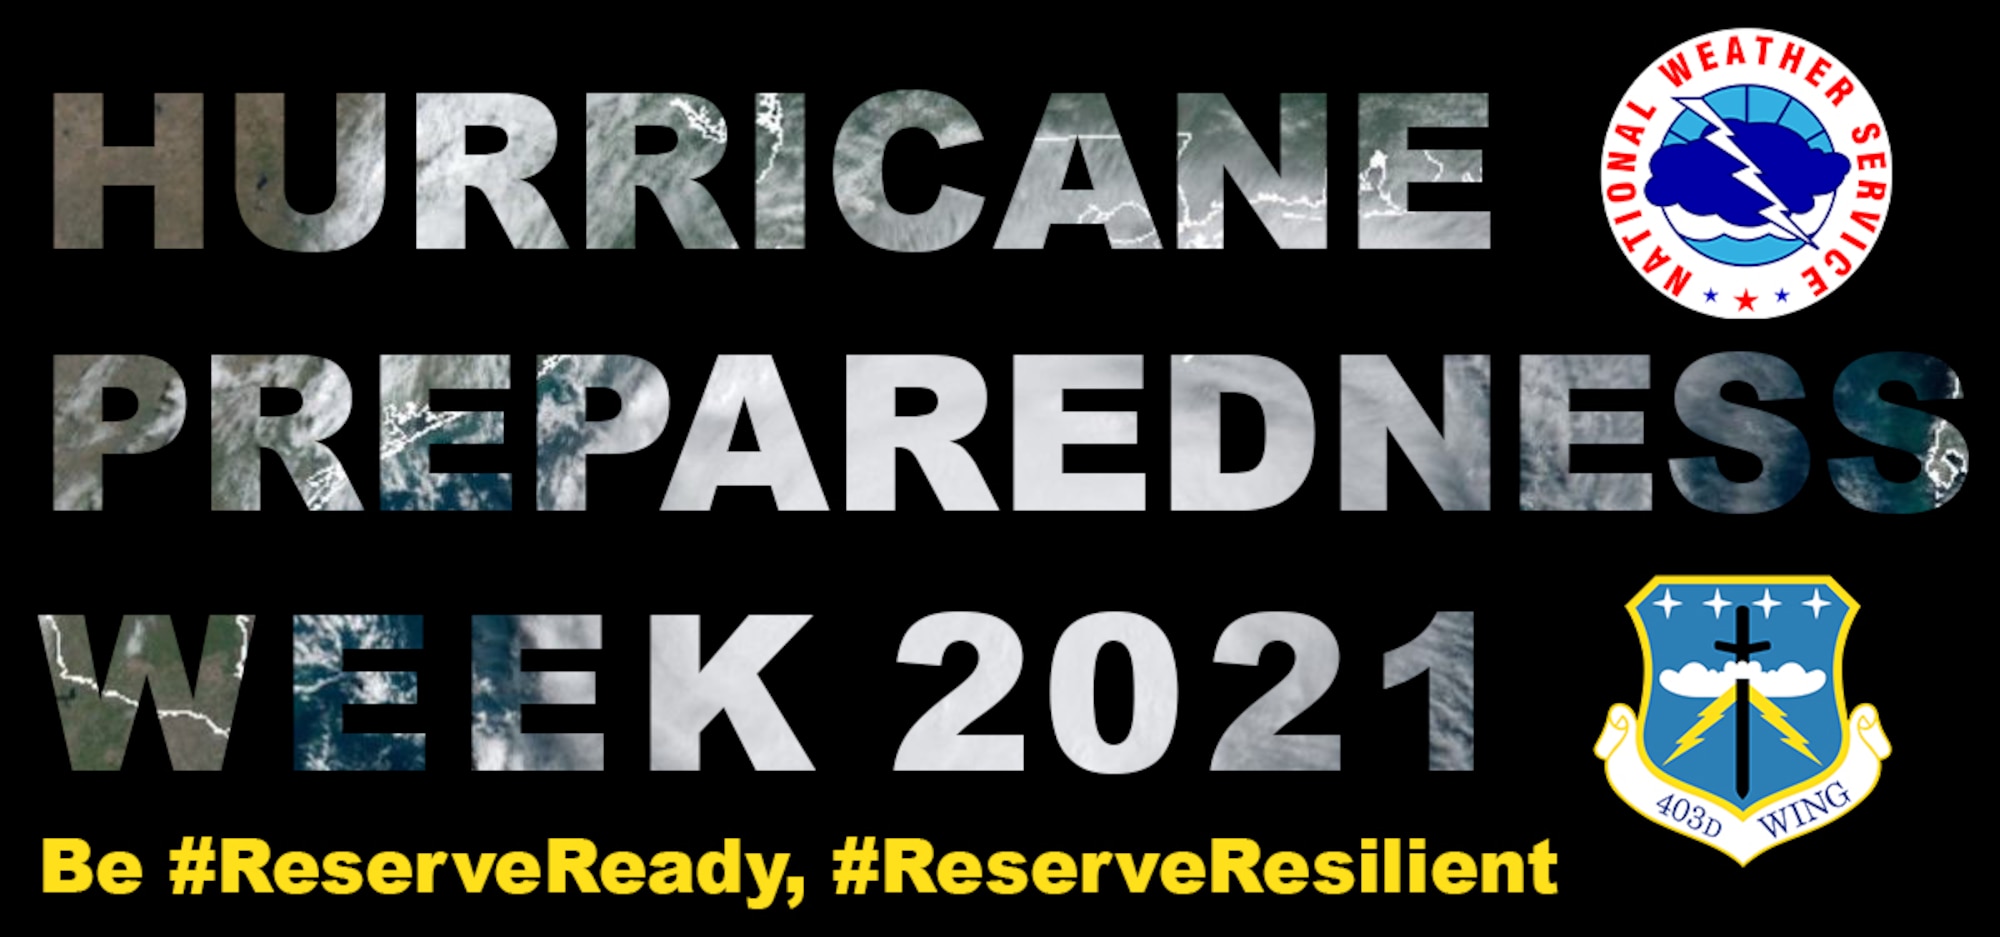 Hurricane Preparedness Week Tips and resources to make sure you're